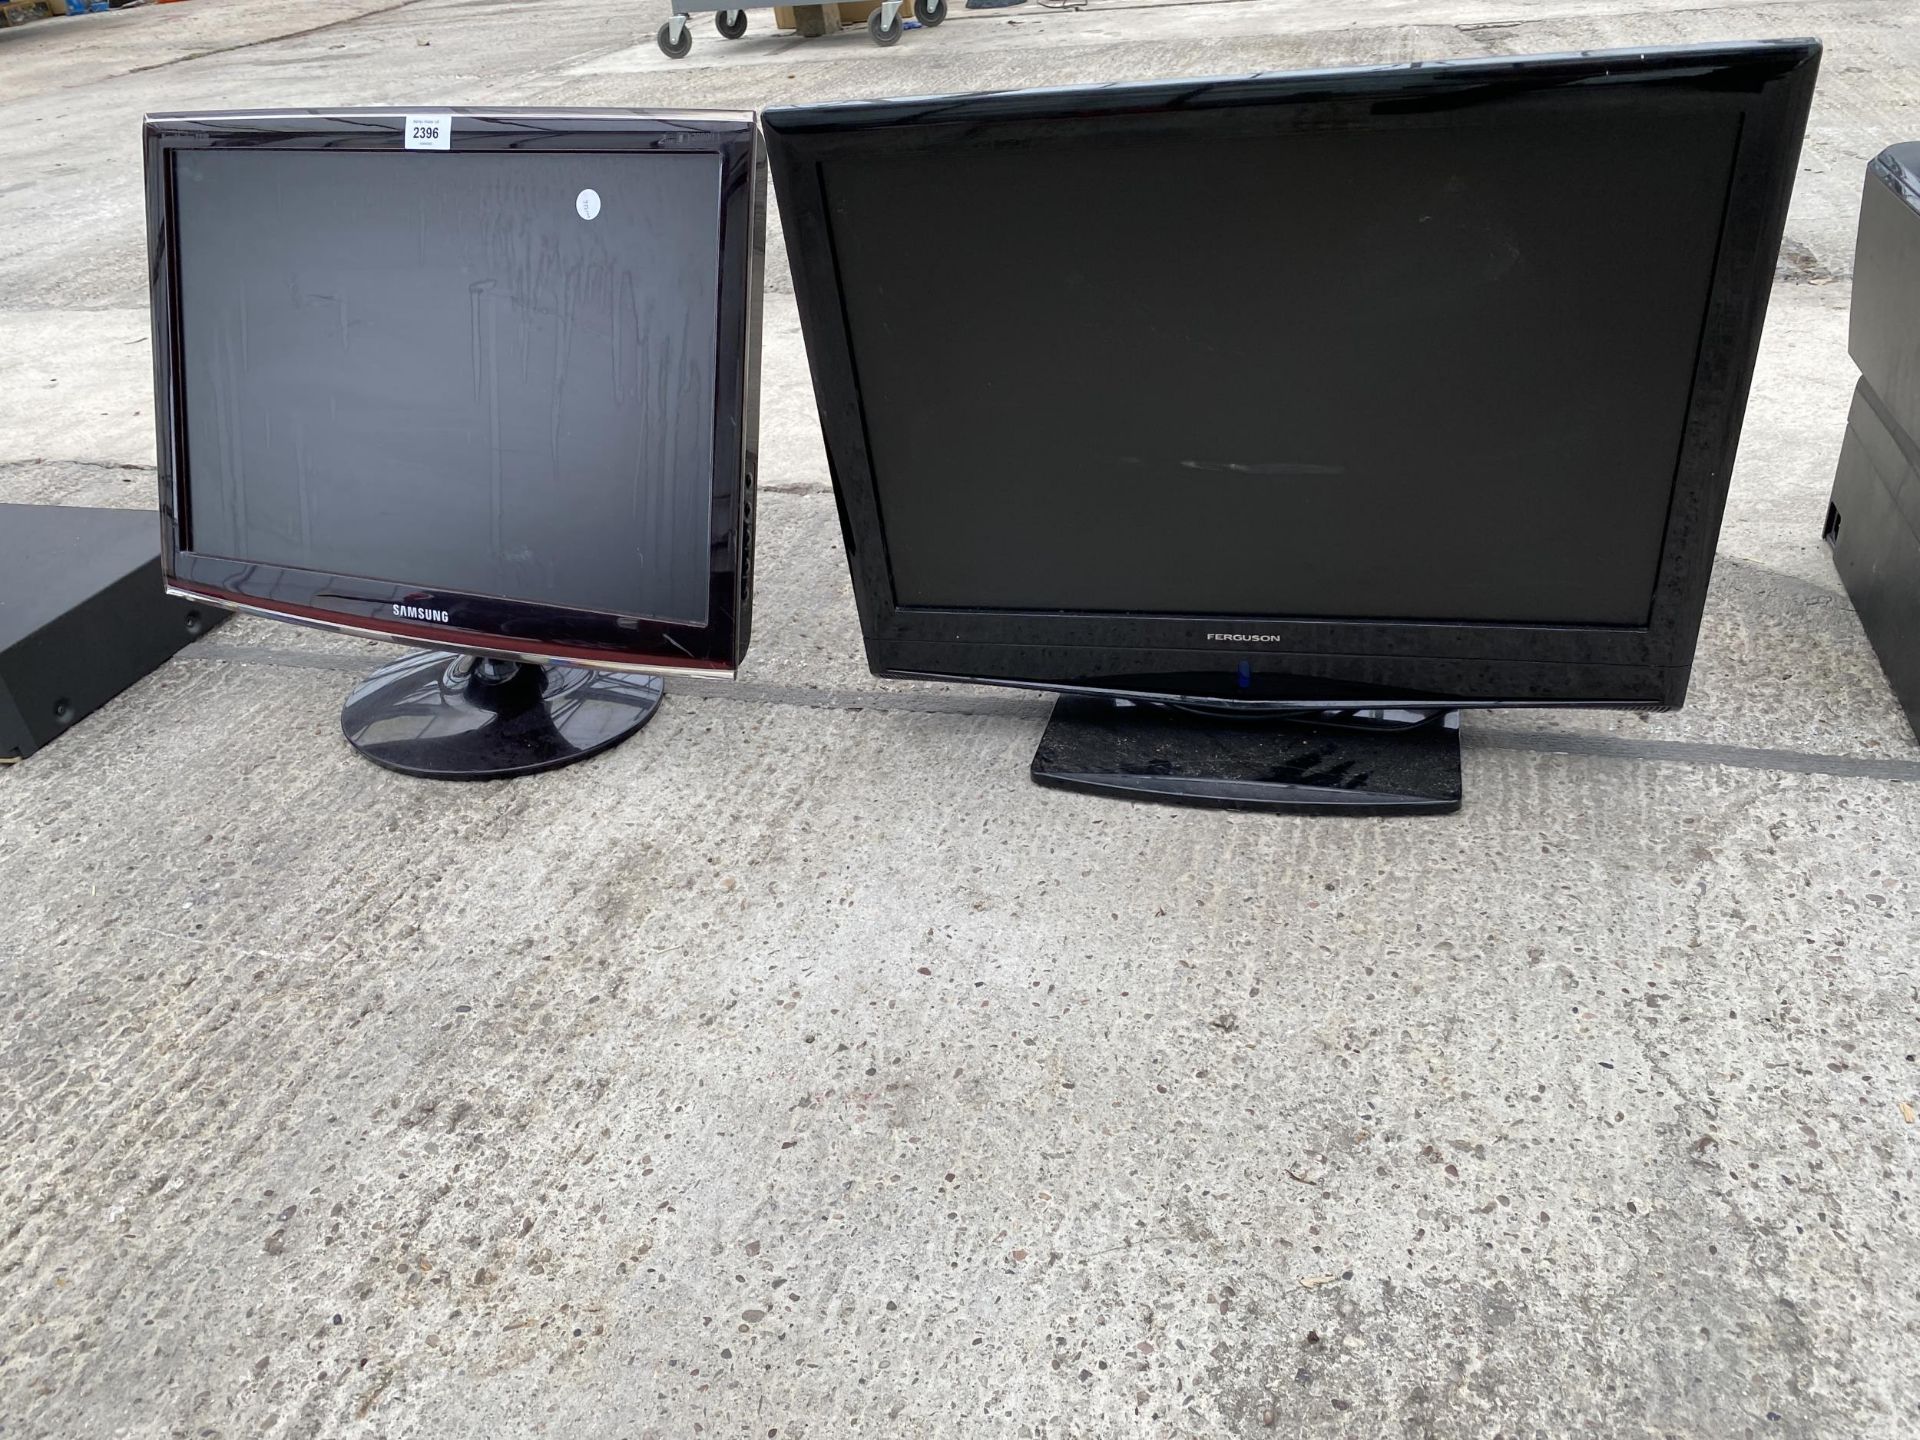 A SAMSUNG TELEVISION AND A FERGUSON TELEVISION